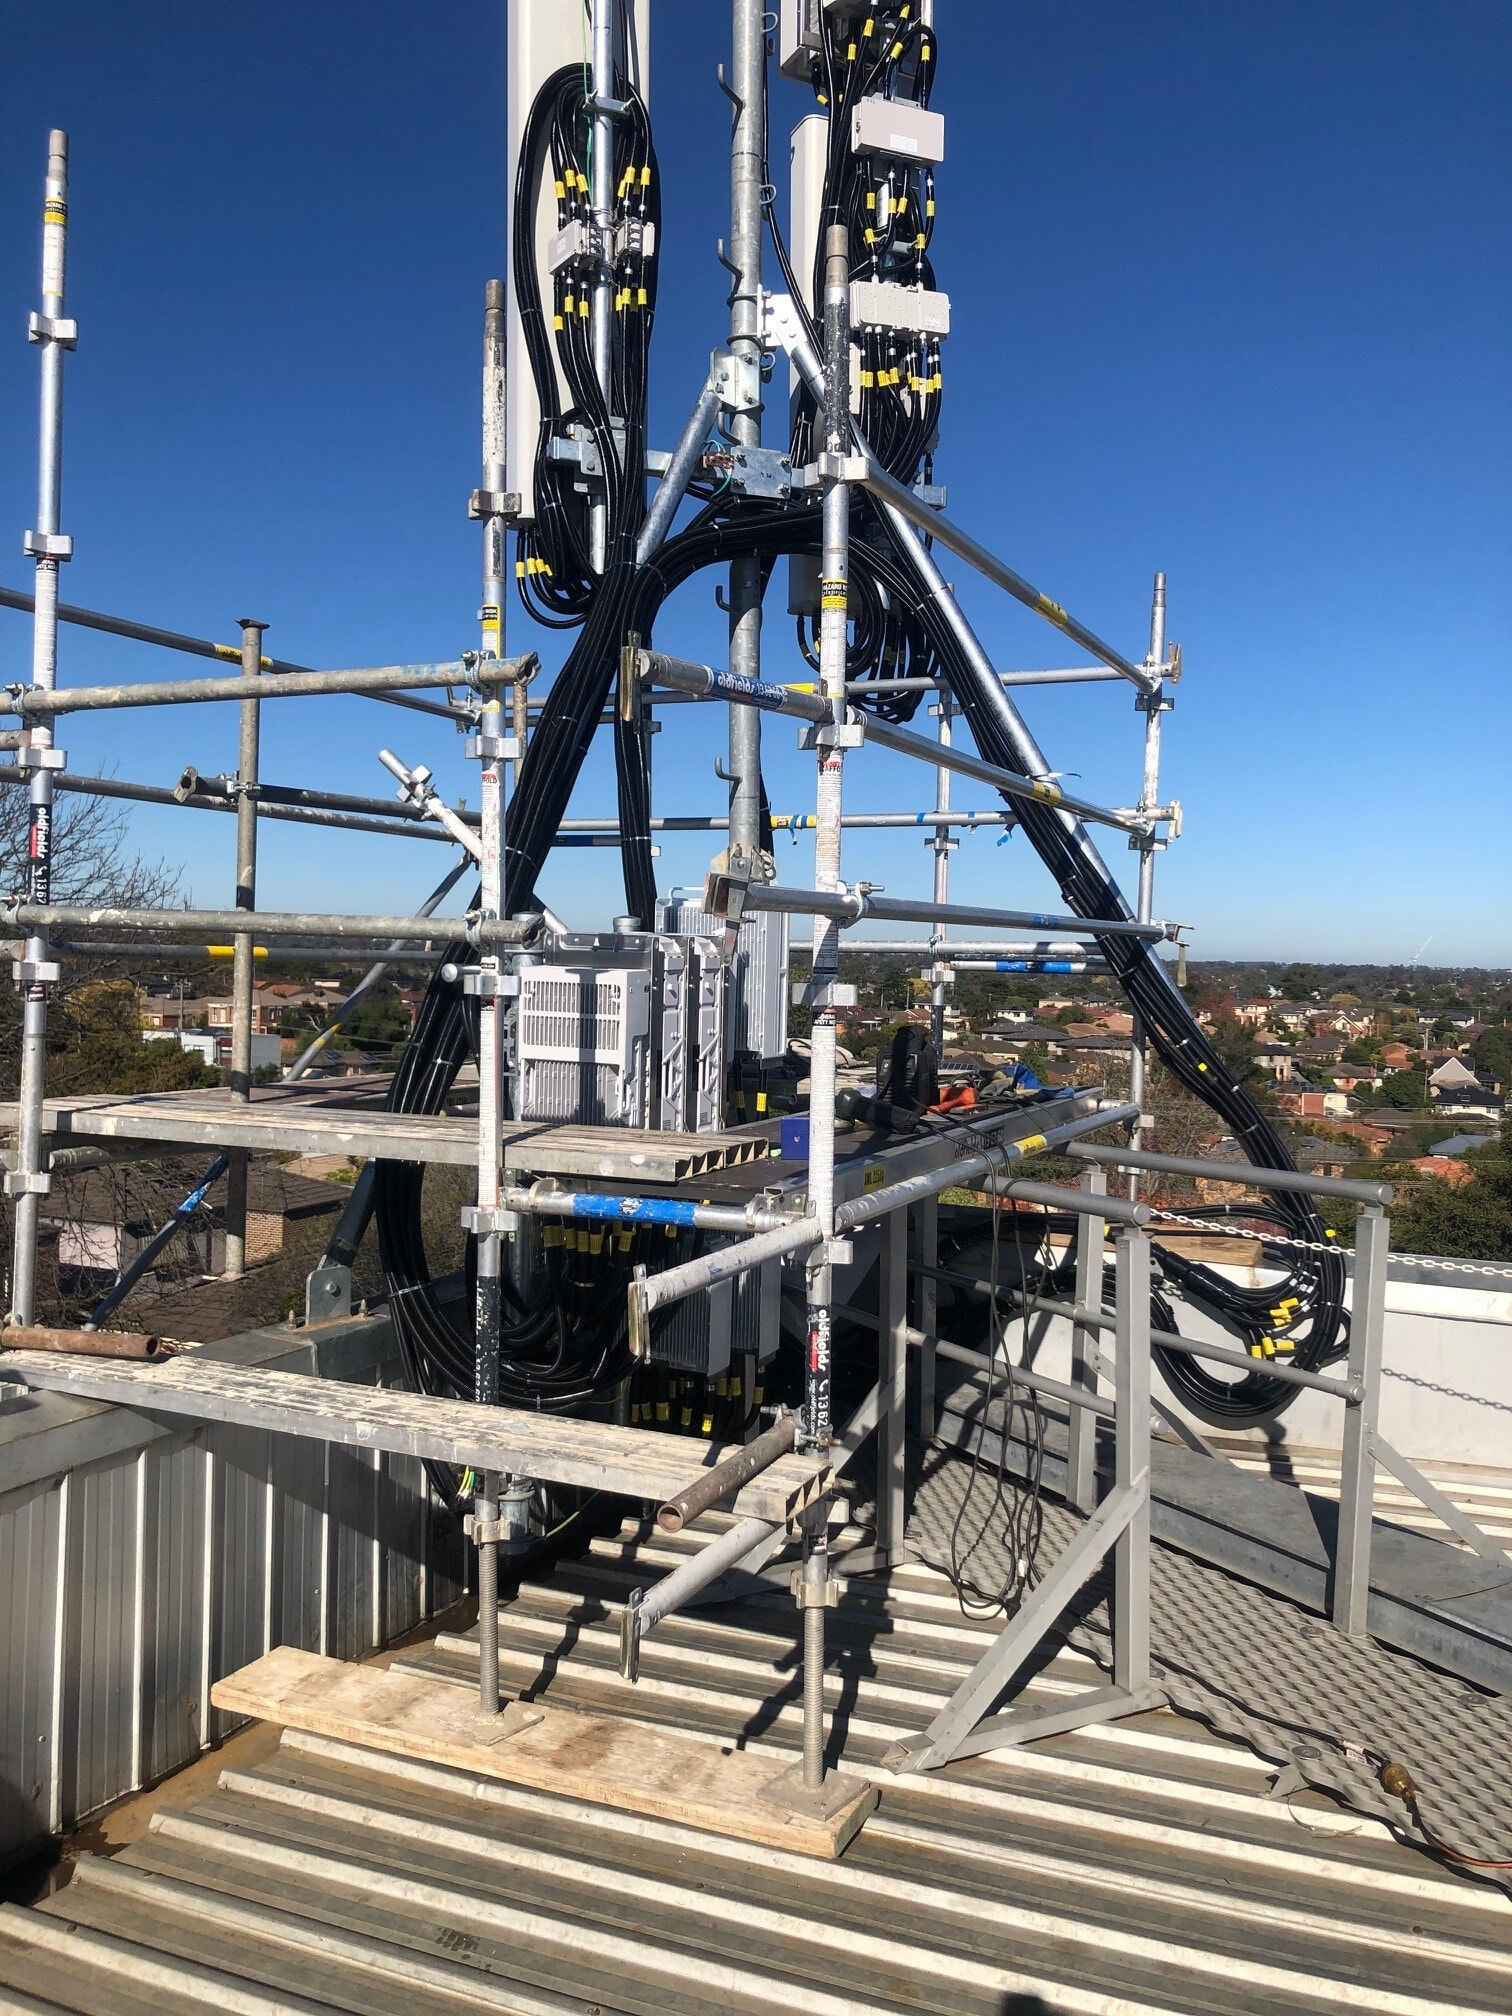 Antenna Mount Headframe steelwork at Donvale West for Skycomms.